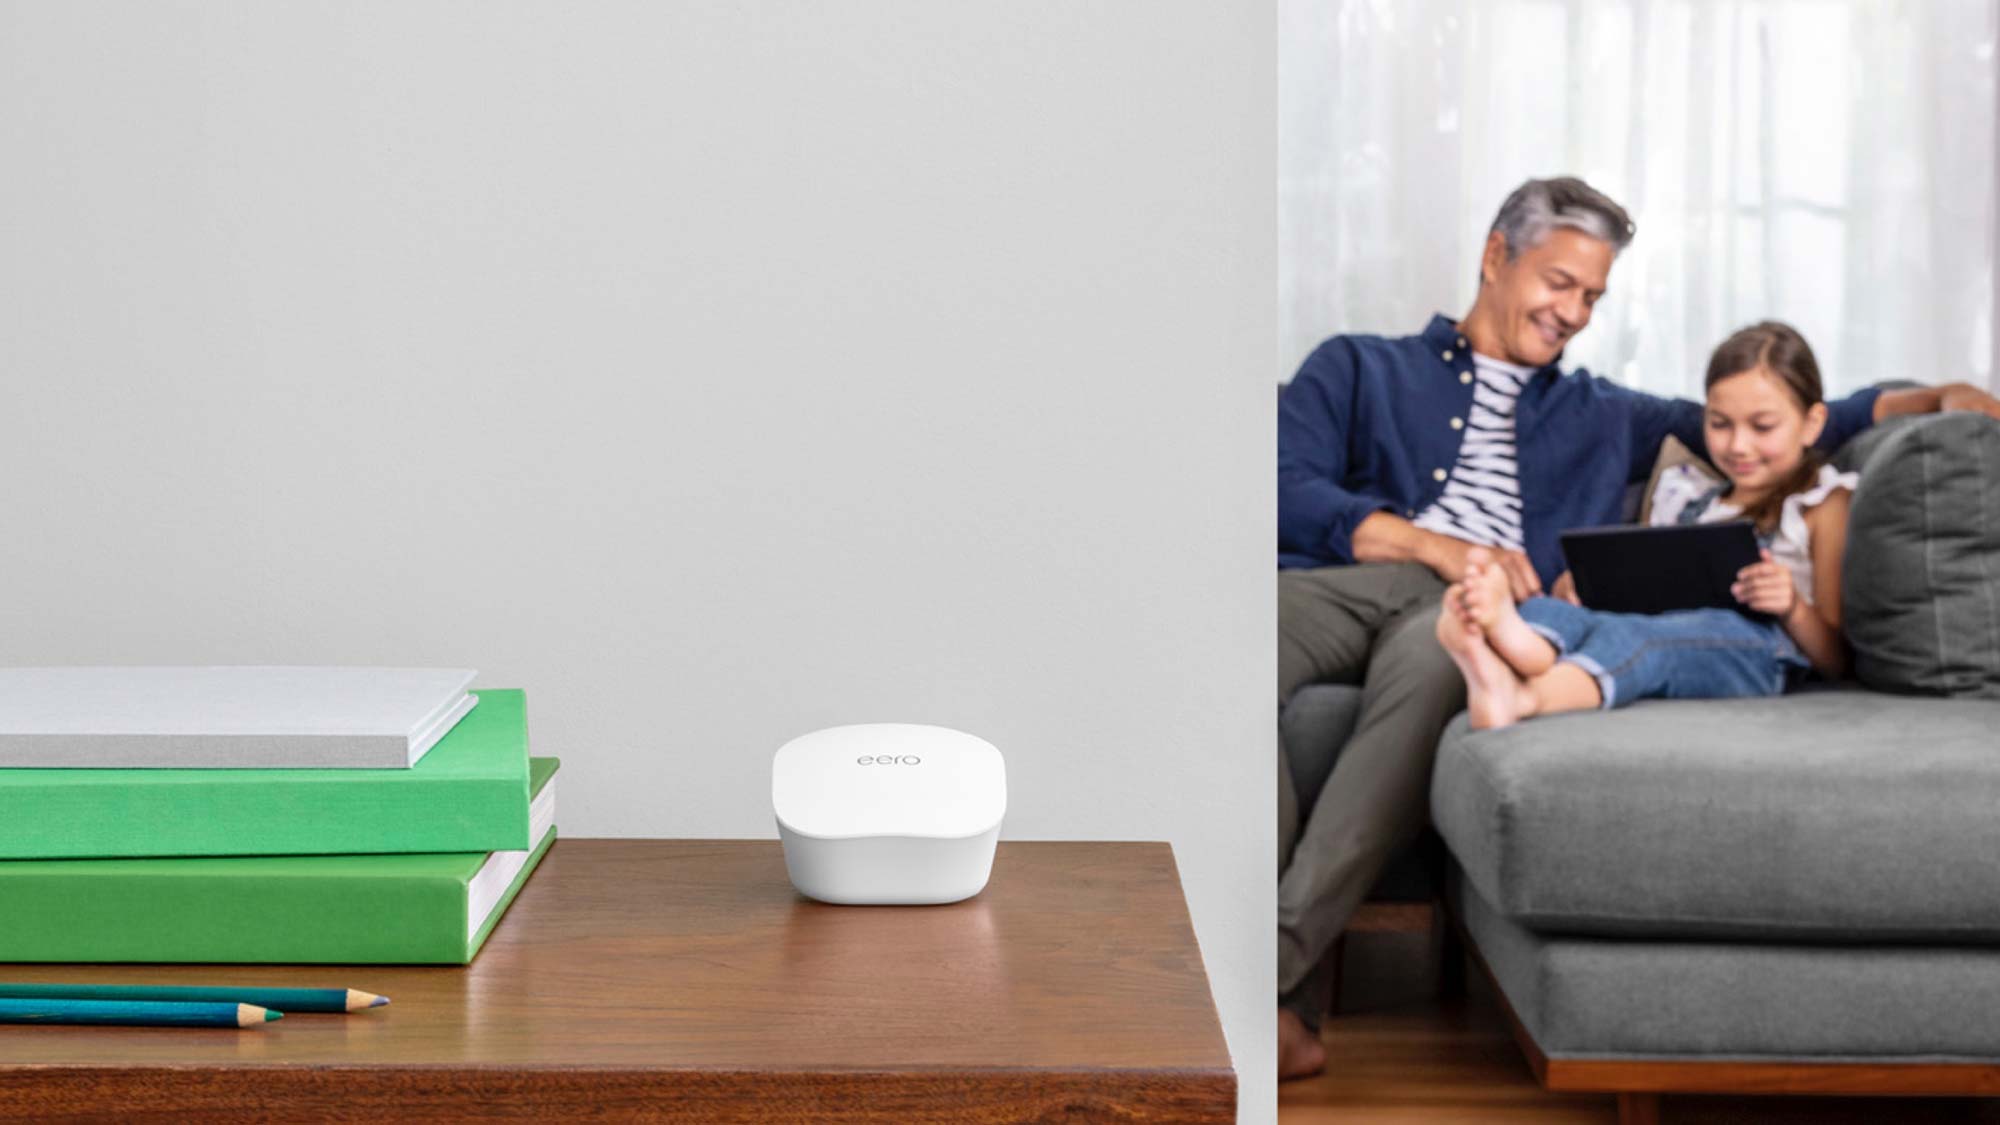 A parent and child using an Eero mesh router